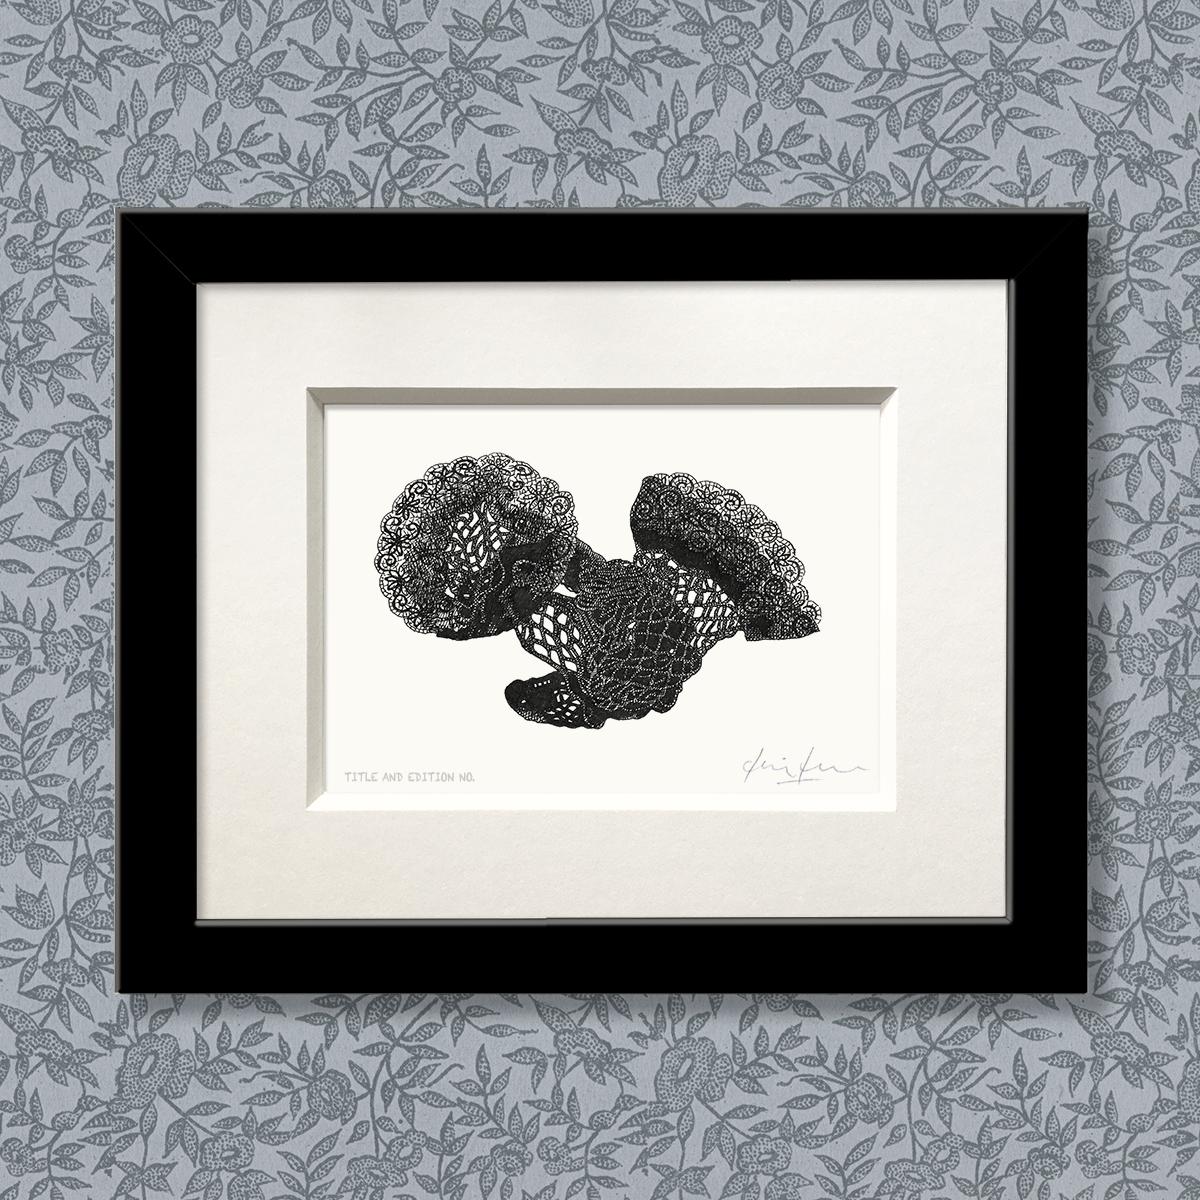 Limited edition print from pen and ink drawing of a pair of discarded fishnet stockings in a black frame